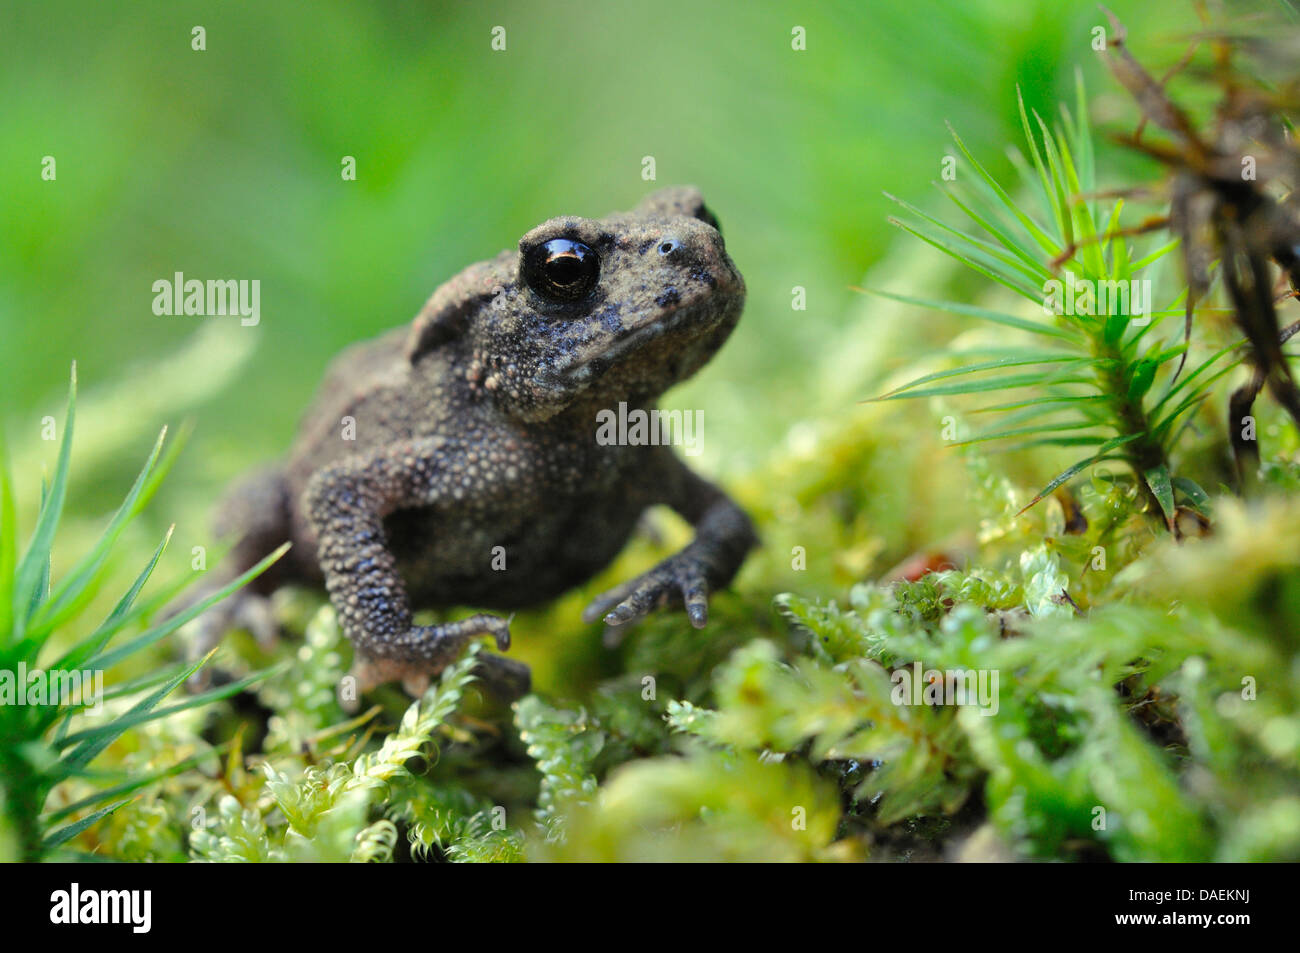 European common toad (Bufo bufo), juvenile sitting on moss, Germany Stock Photo